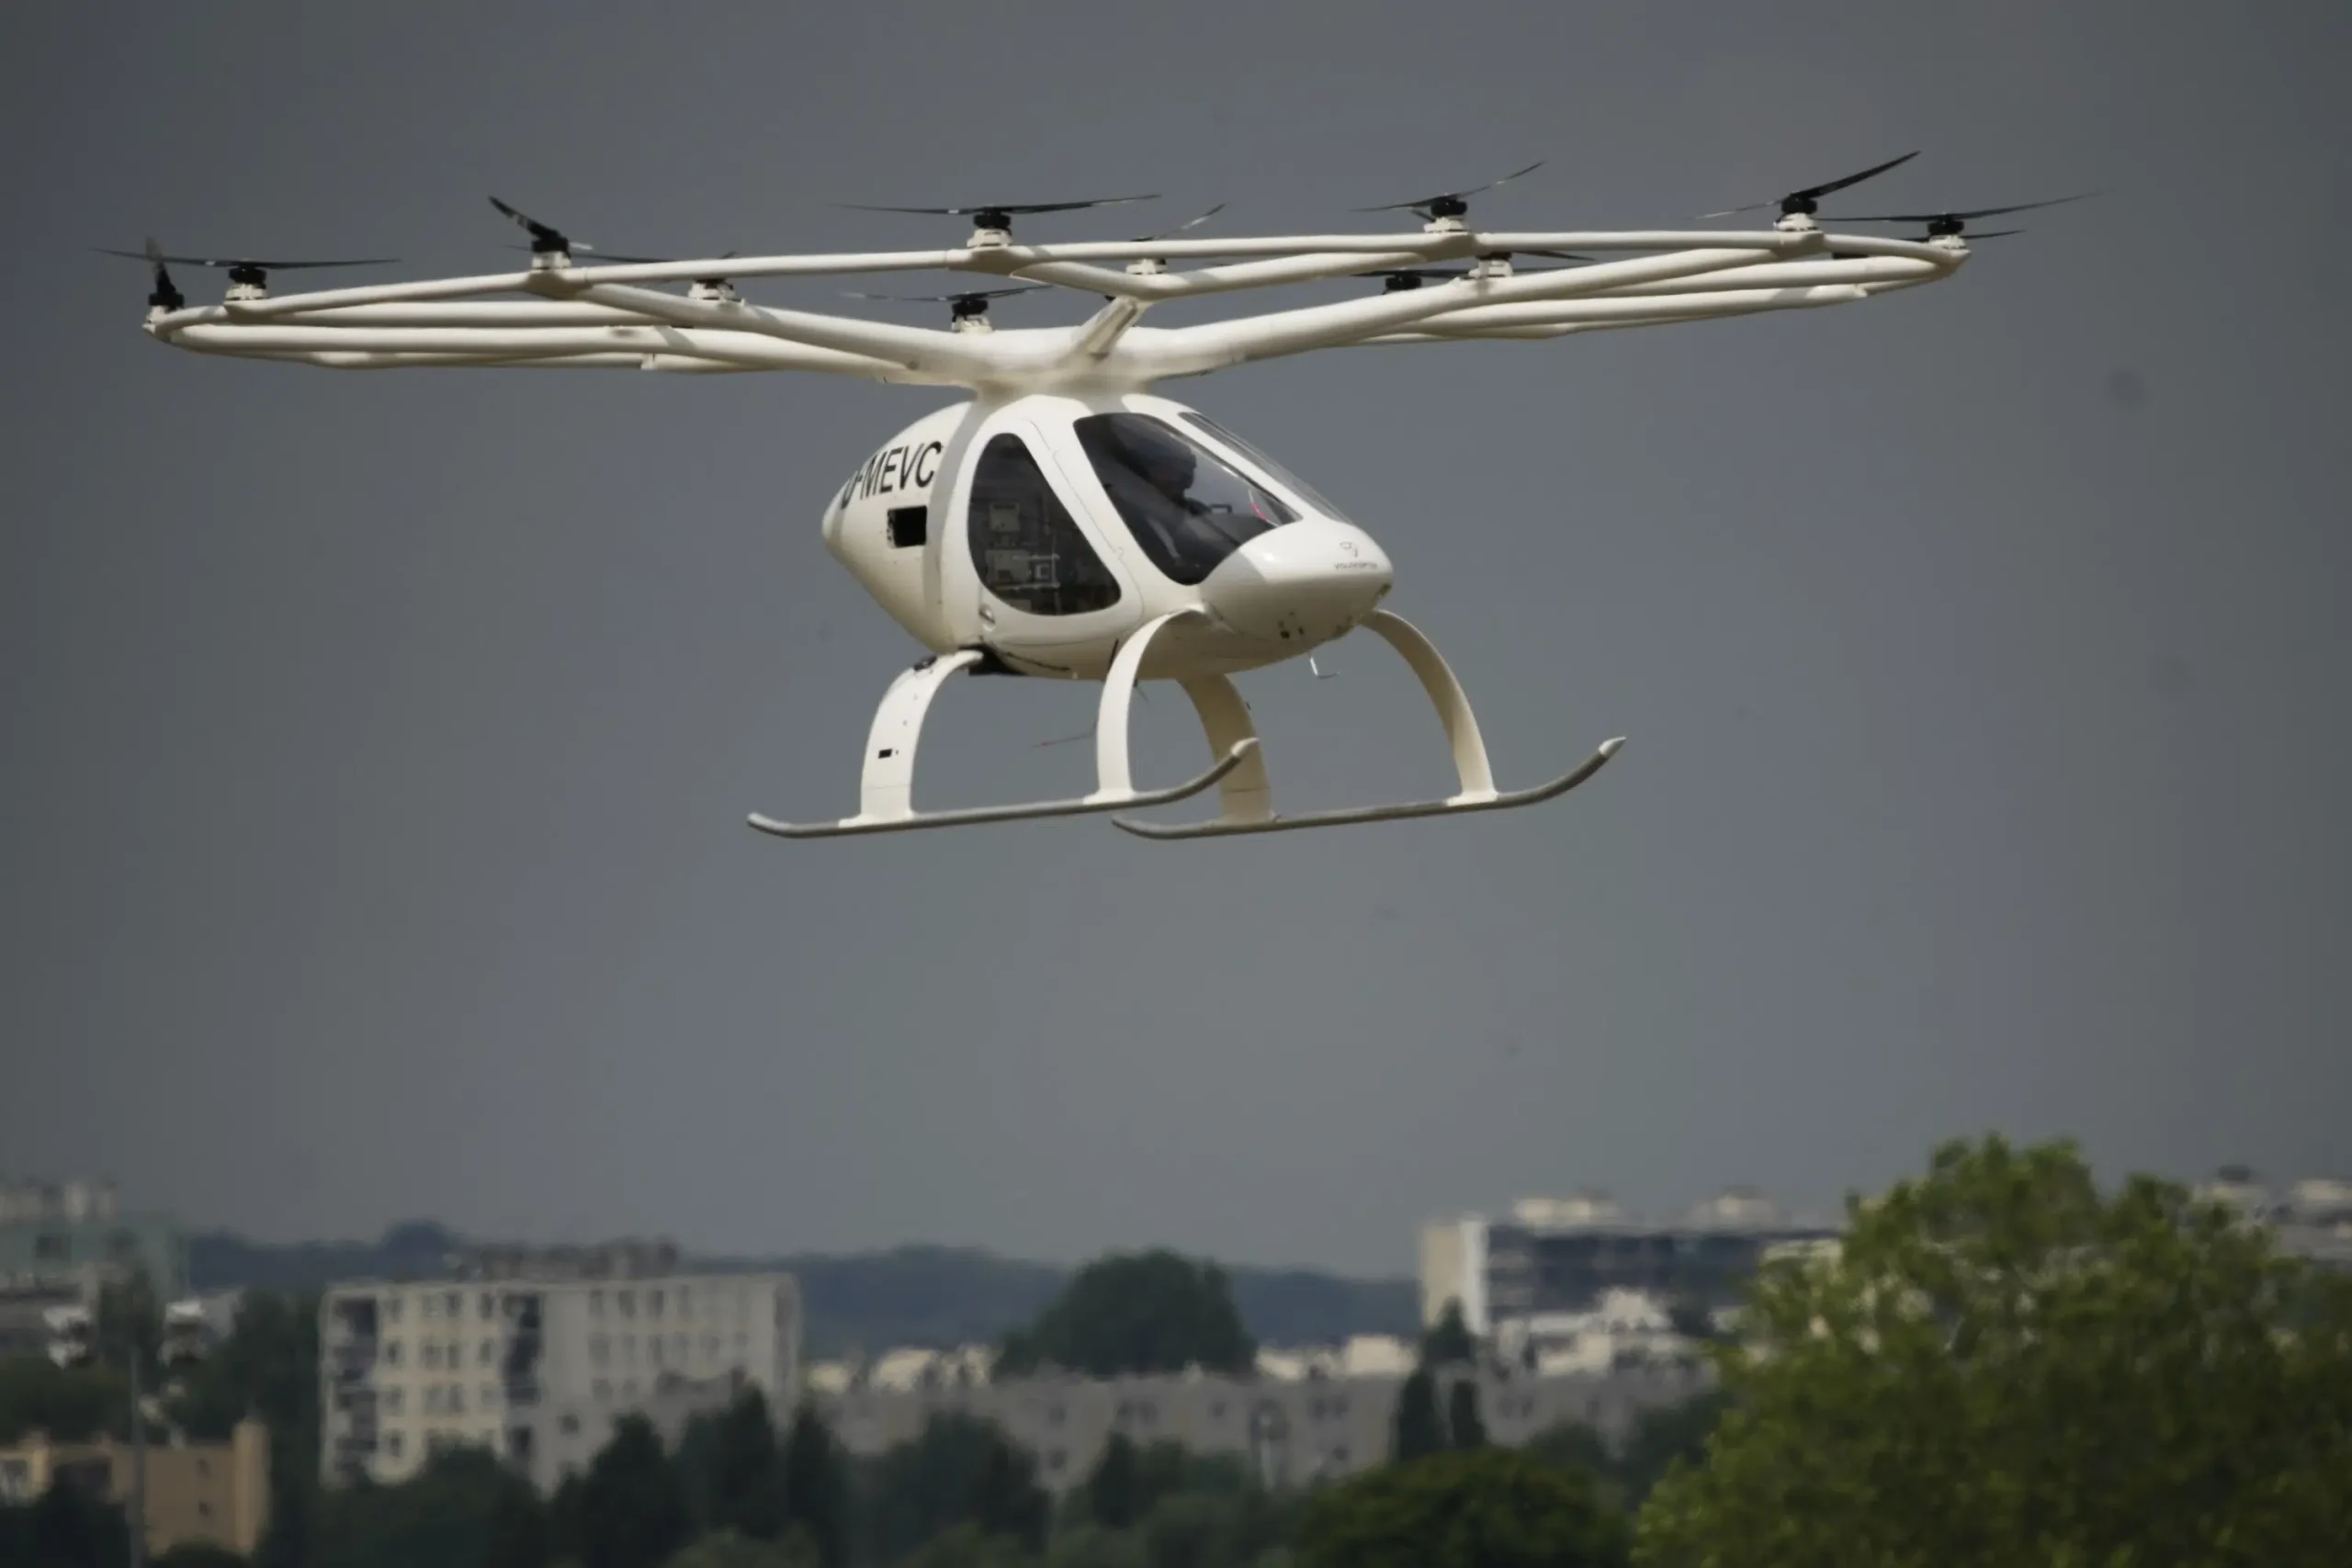 Lean Green flying machines spread their wings in Paris, heralding a transportation revolution.